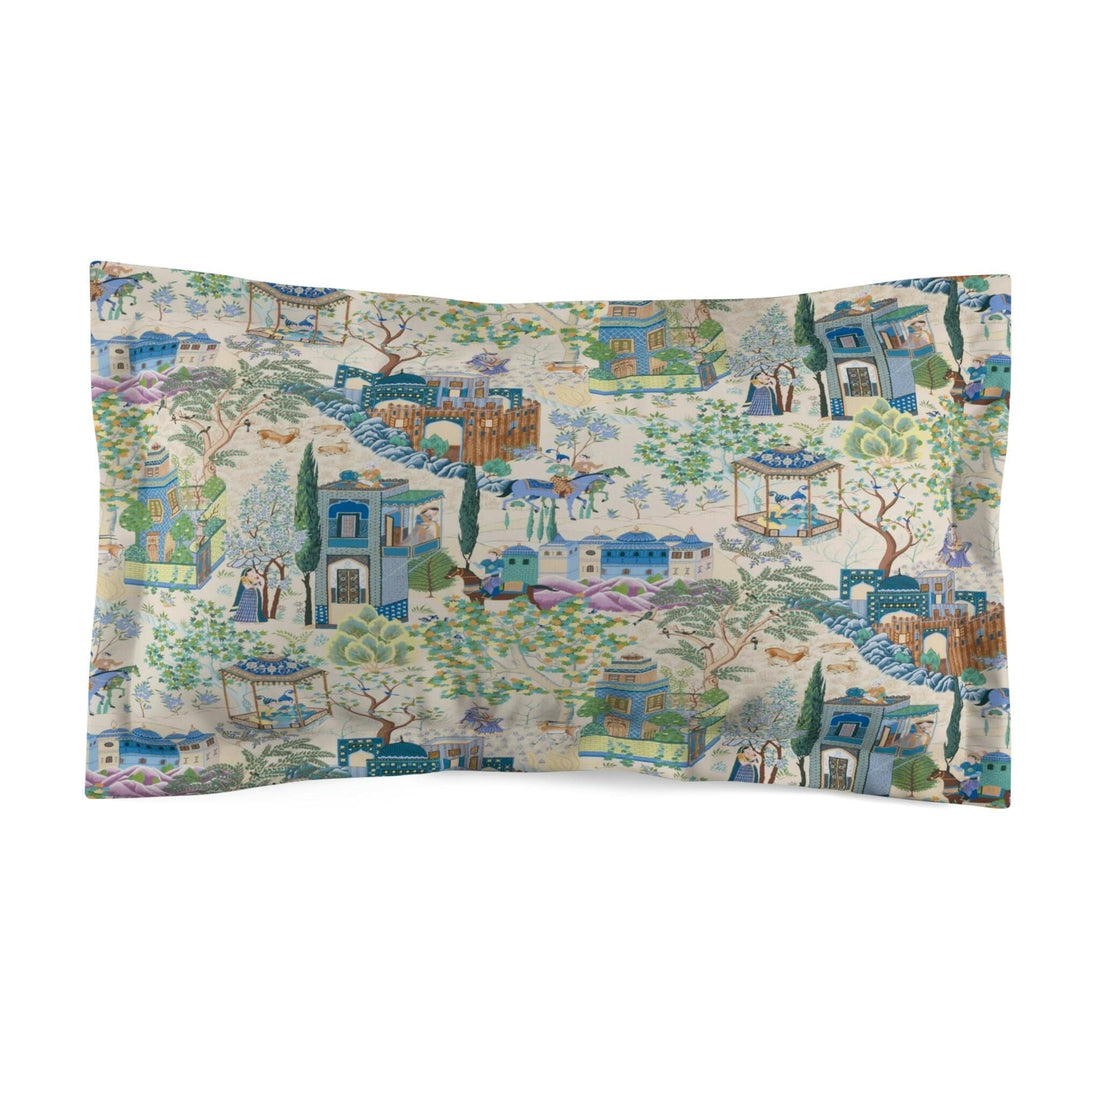 Kate McEnroe New York Vintage Toile De Jouy Pillow Sham, Blue and Green Floral Print Pillow Cover, Traditional Asian Country Scene with Horses, Rustic Chic DecorPillow Shams17359419854278556018